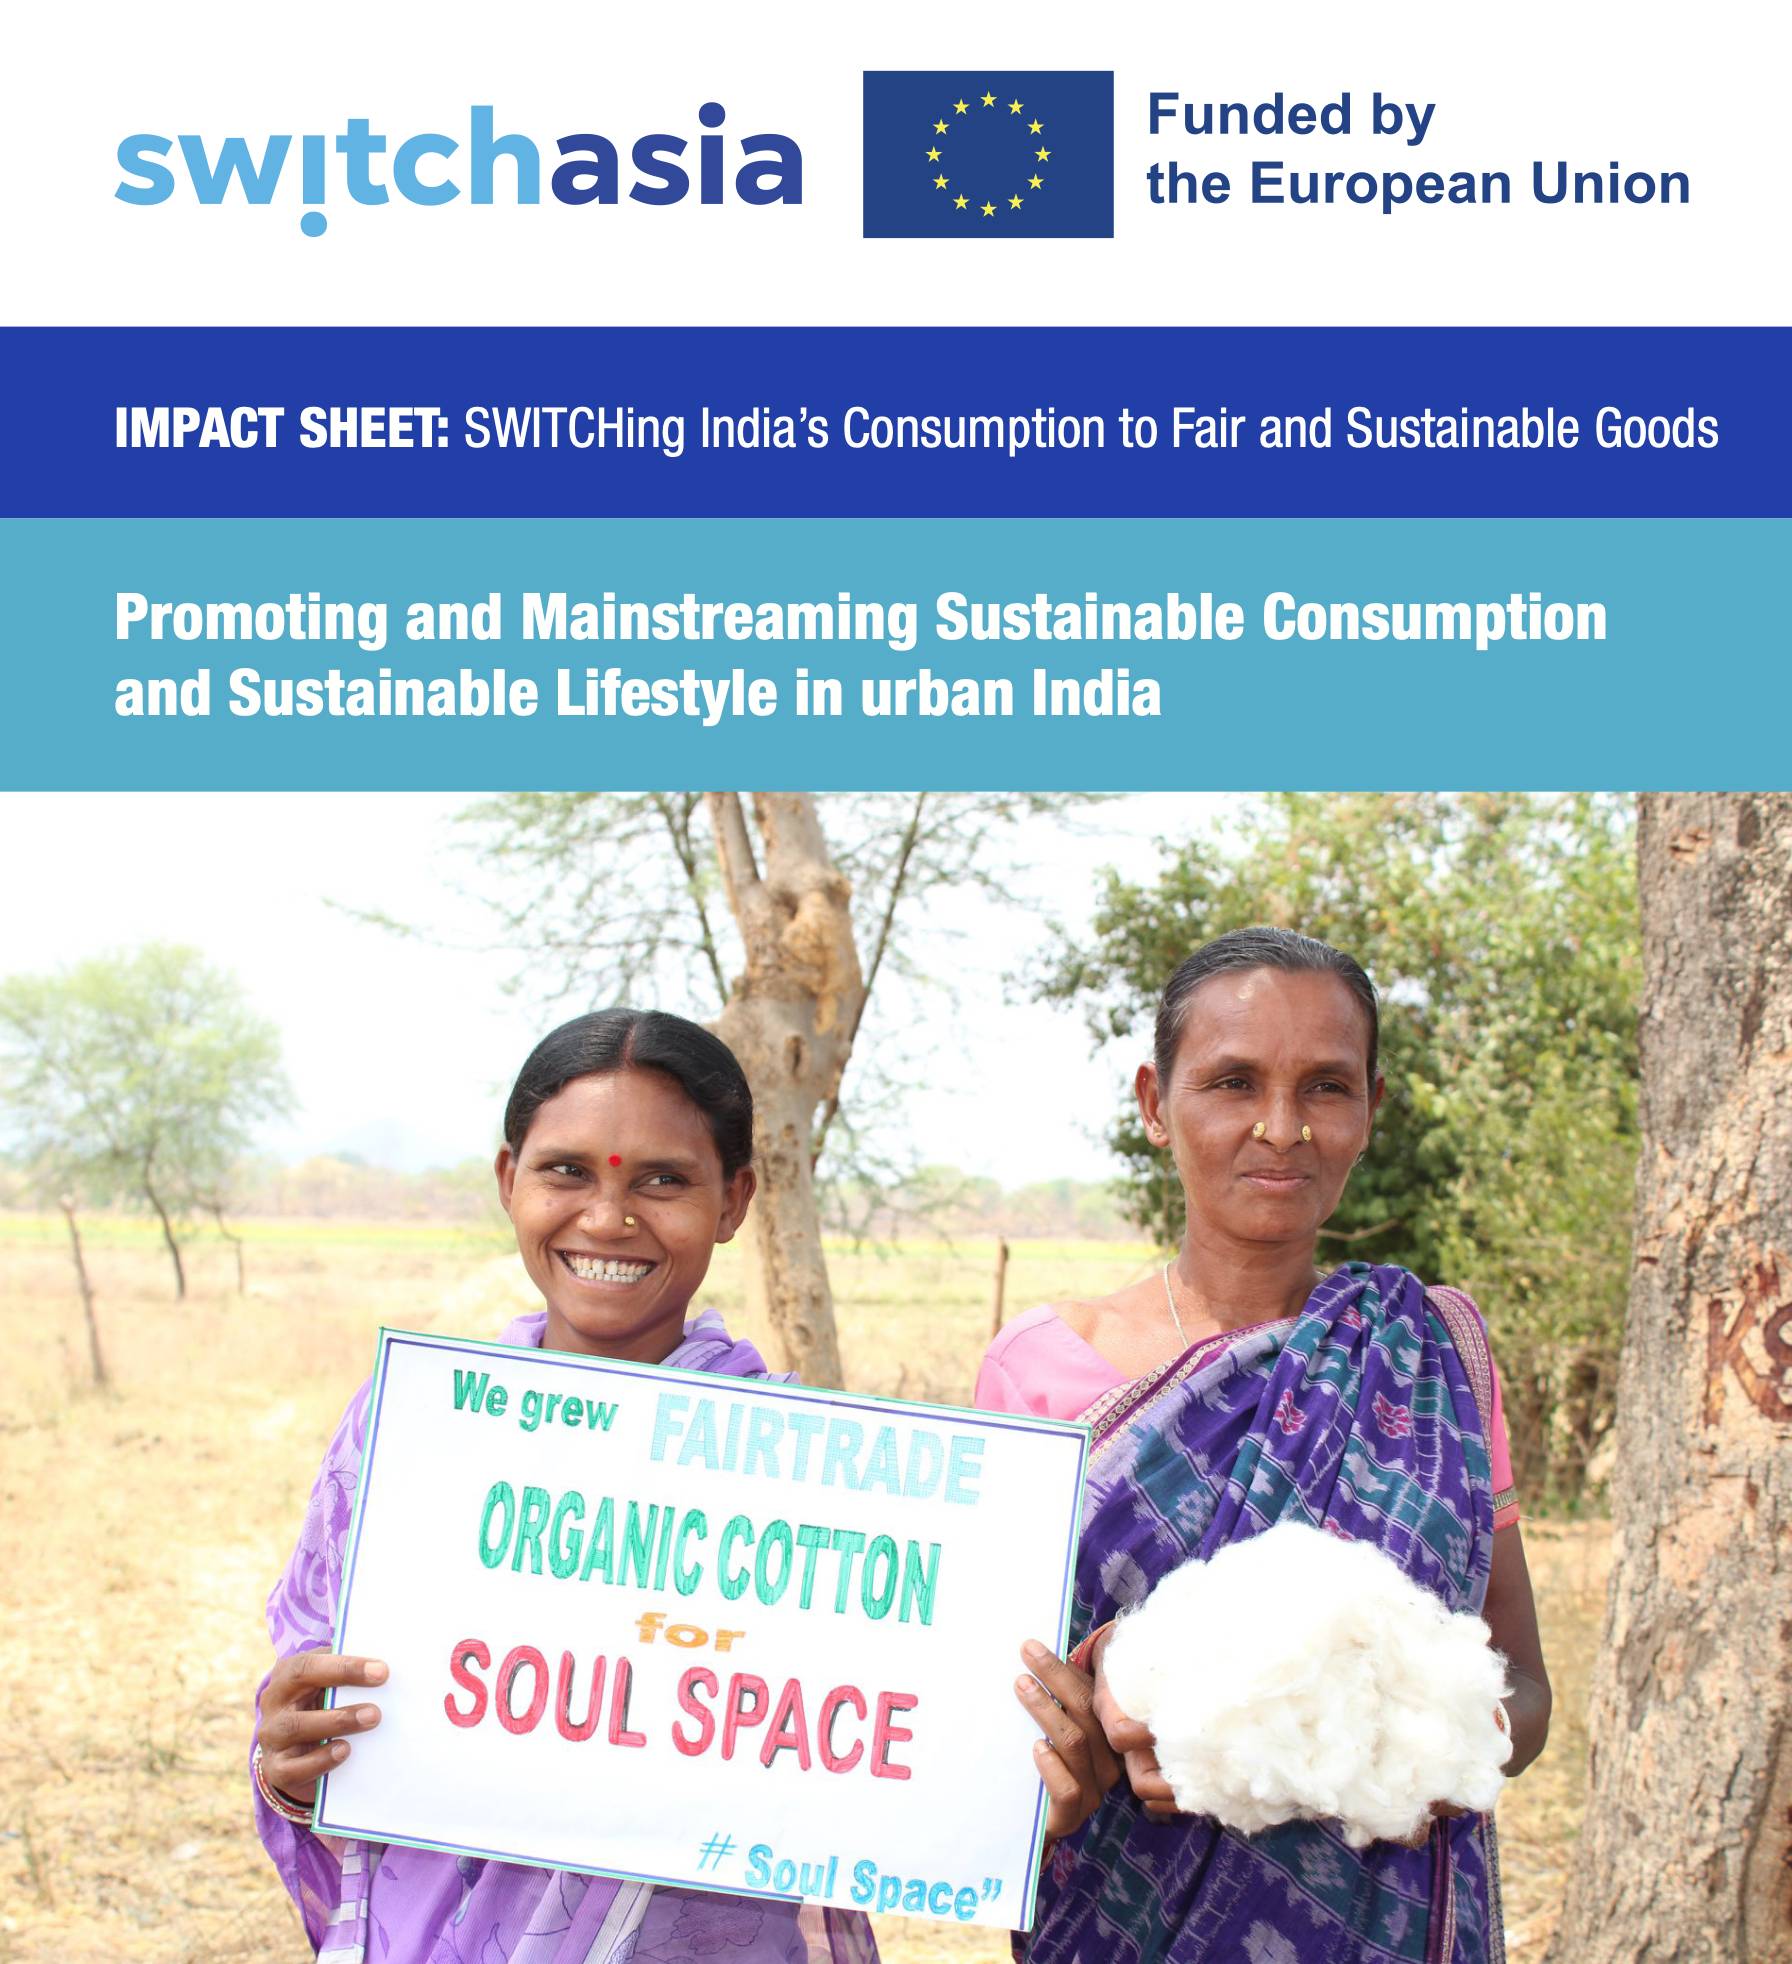 Impact Sheet: SWITCHing India’s Consumption to Fair and Sustainable Goods